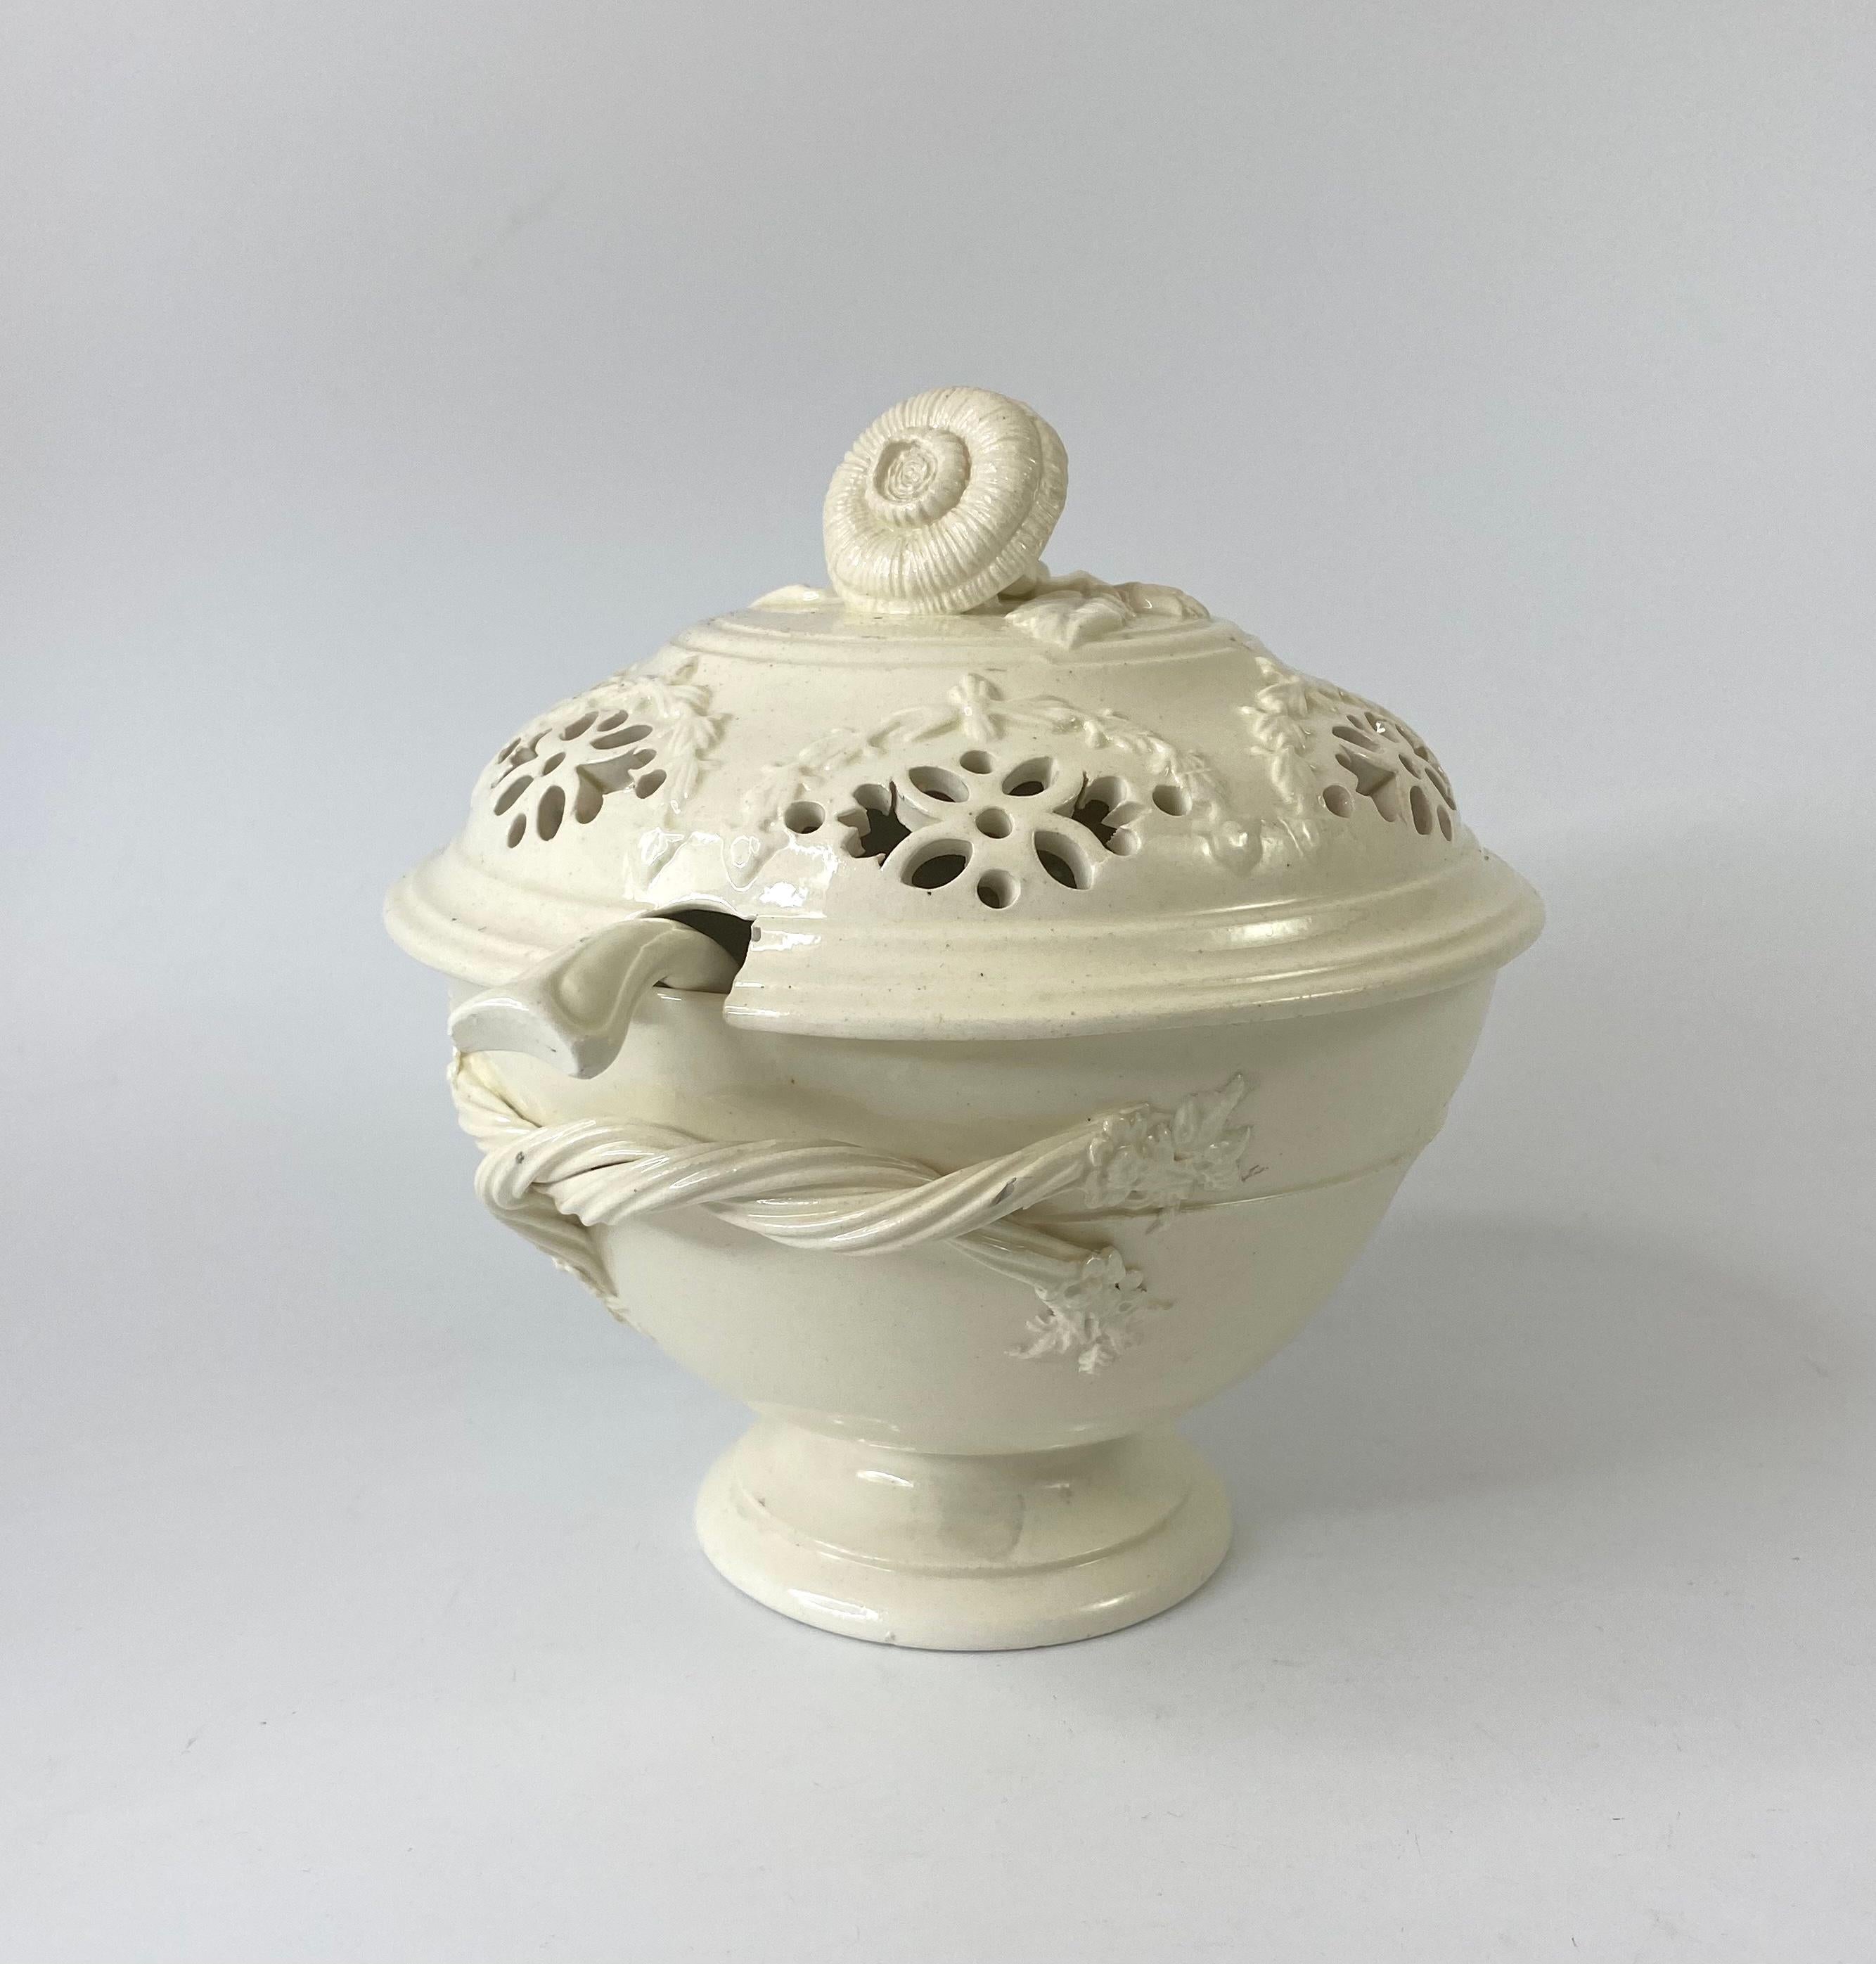 English creamware tureen, cover, ladle and stand, c. 1790, probably Yorkshire. The tureen having rope twist handles, terminating with flowers and leaves, standing upon a pedestal footrim. Having a pierced cover, moulded with floral swags, and